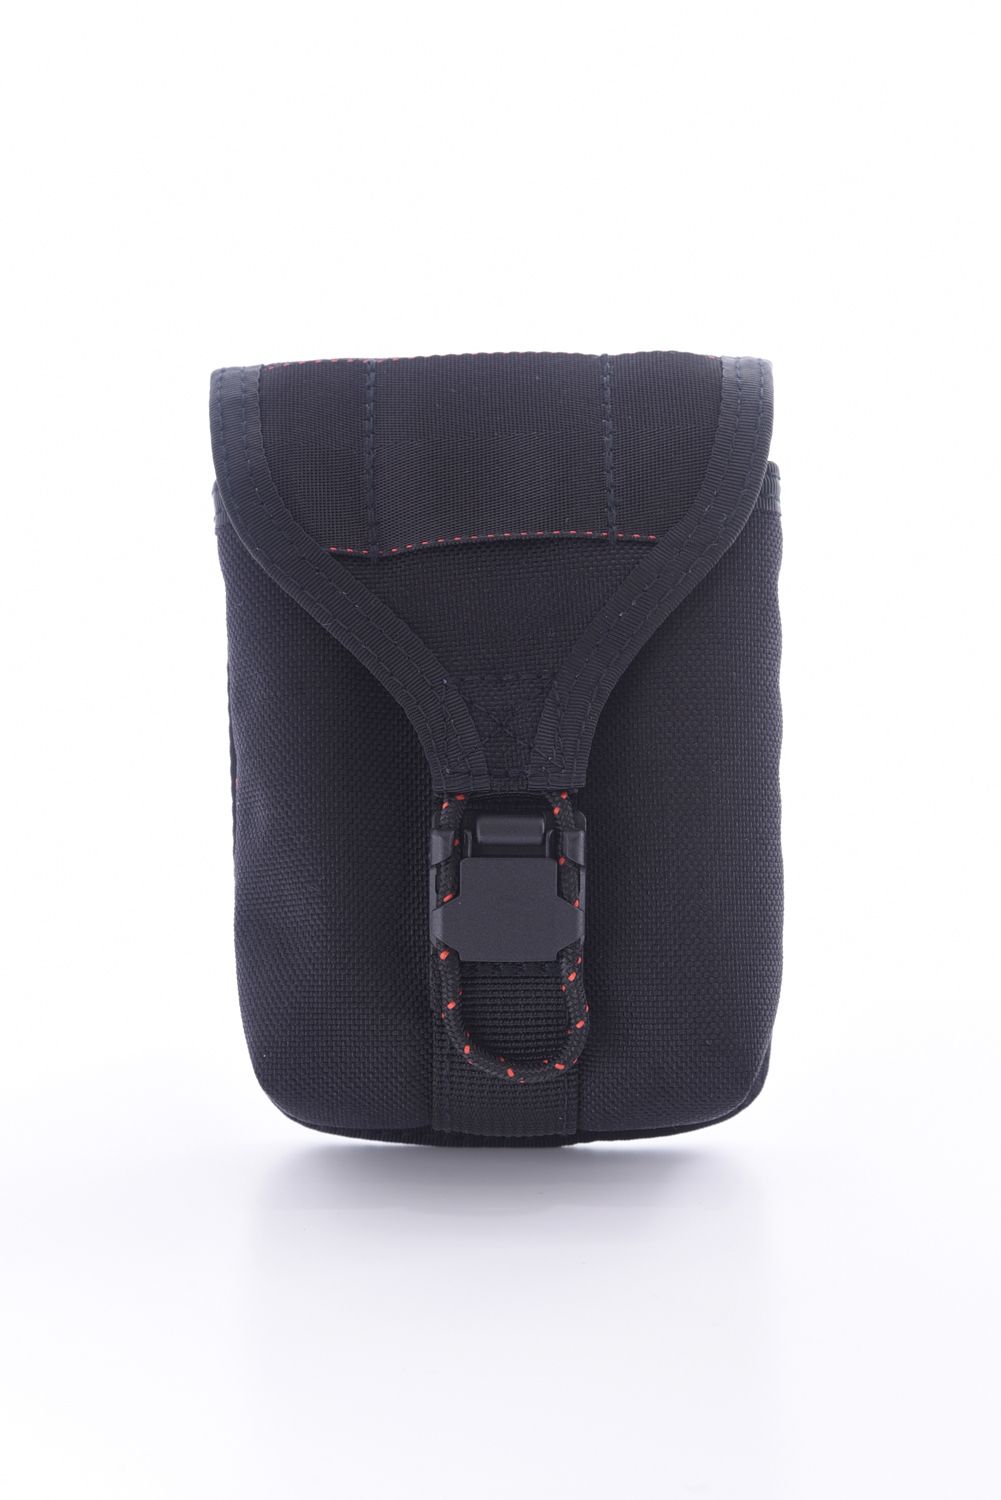 BRIEFING - 【1000Dコーデュラナイロン】 SCOPE BOX POUCH